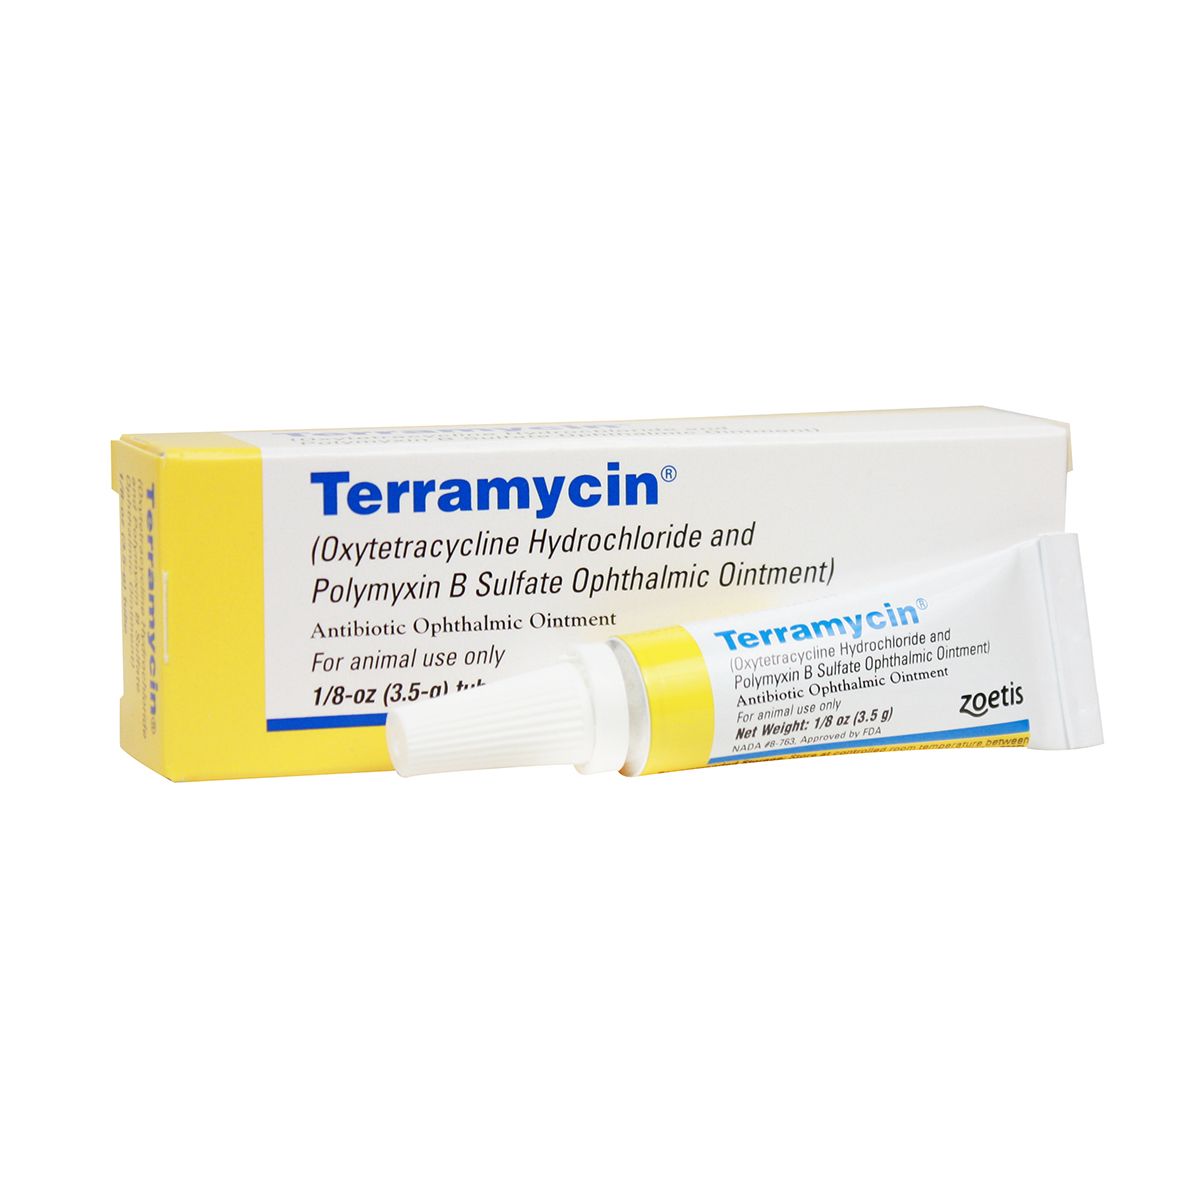 Terramycin Ophthalmic Ointment for Animal Use 3.5g